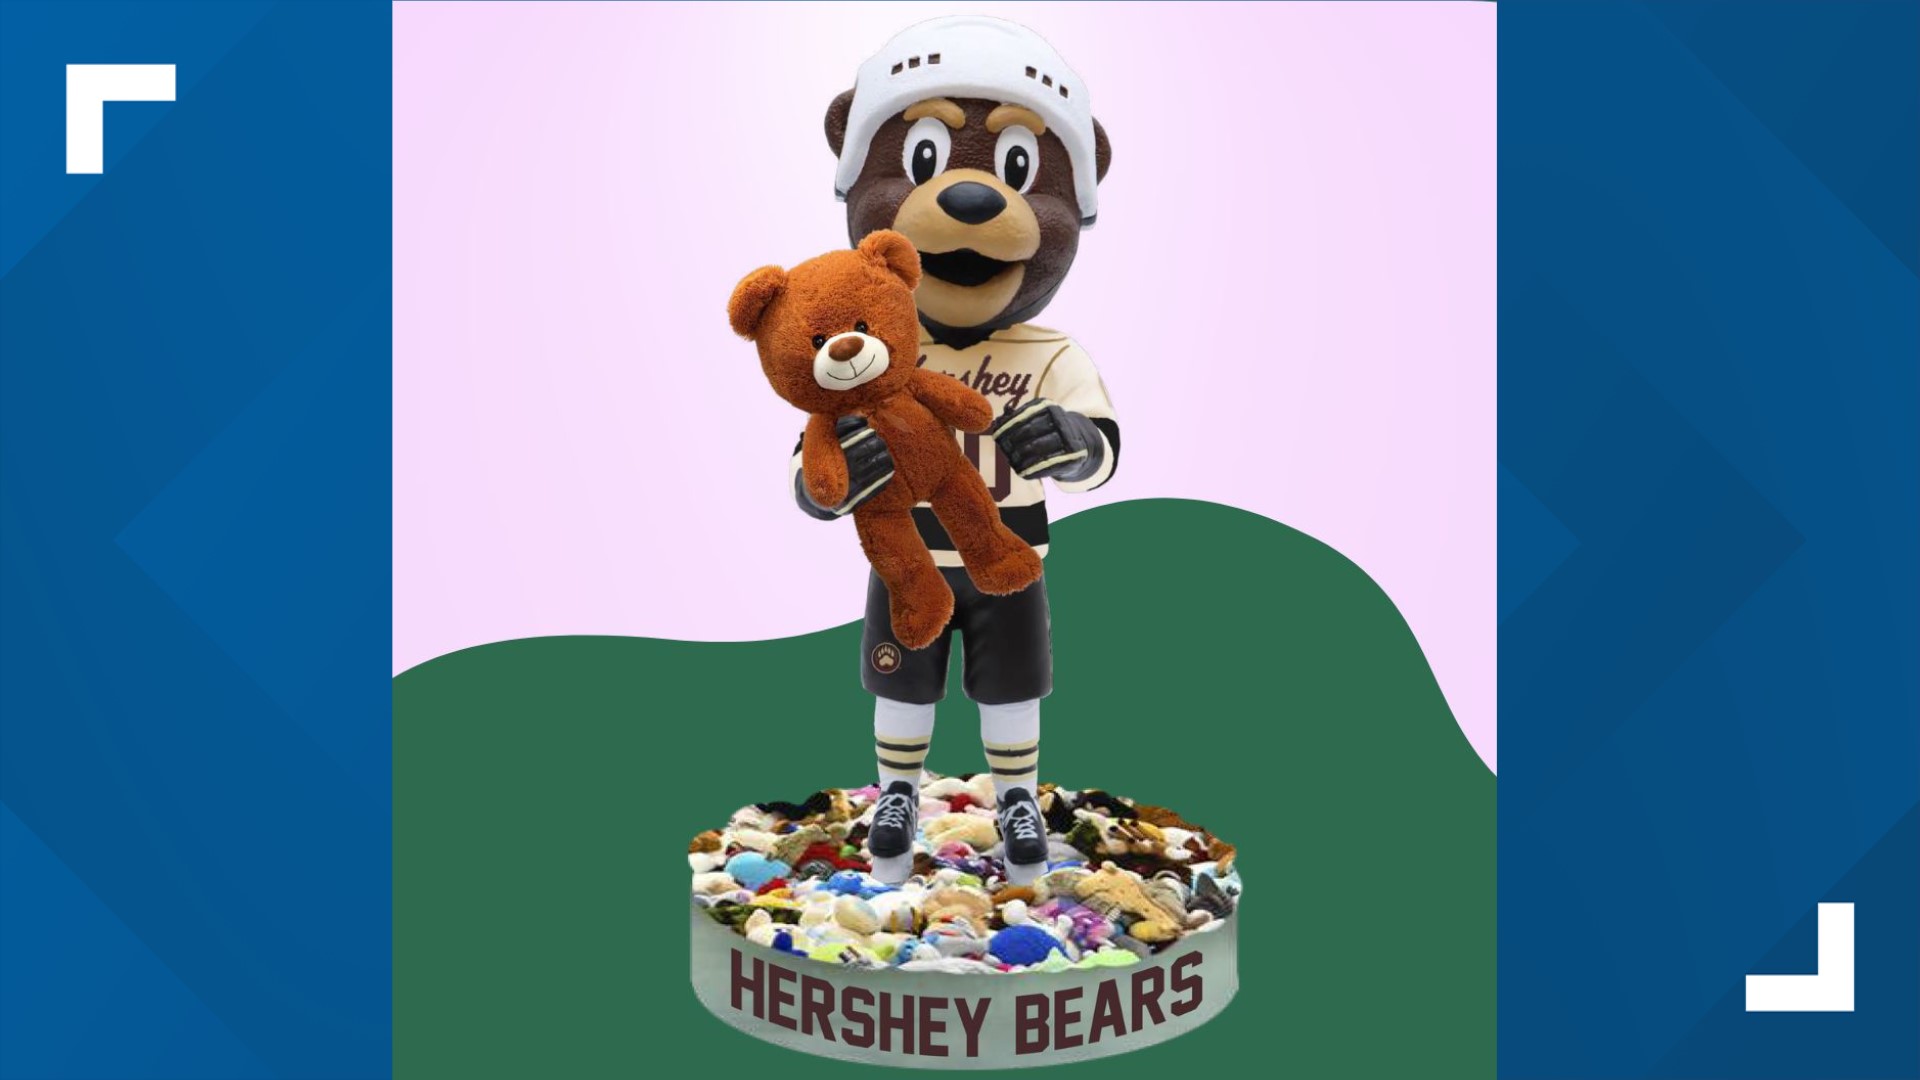 The bobbleheads, which are expected to ship in July, are $40 each plus a shipping charge of $8 per order.